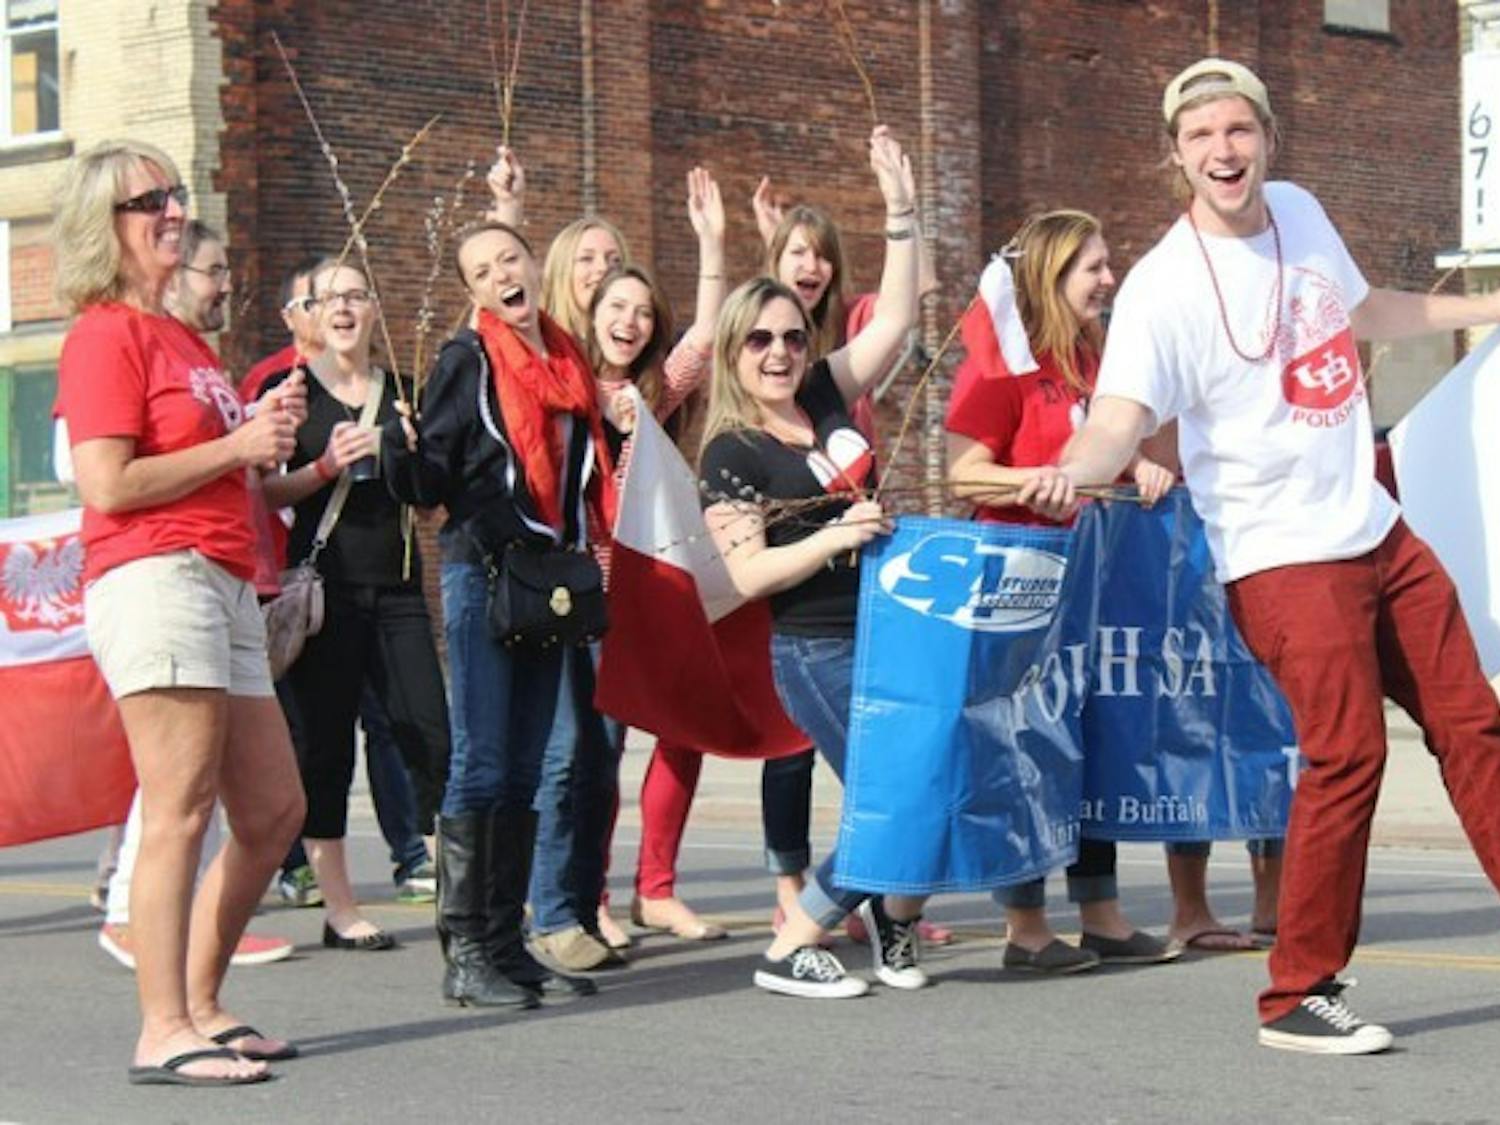 Last year&rsquo;s President of the Polish Student Association Krzysztof Kosz, led a group at Buffalo&rsquo;s Dyngus Day&nbsp;celebration to represent the PolSA. Buffalo&rsquo;s ties to Poland date back to 1860 and a large number of Polish descendants still live in Buffalo.
Joe Konze Jr, The Spectrum